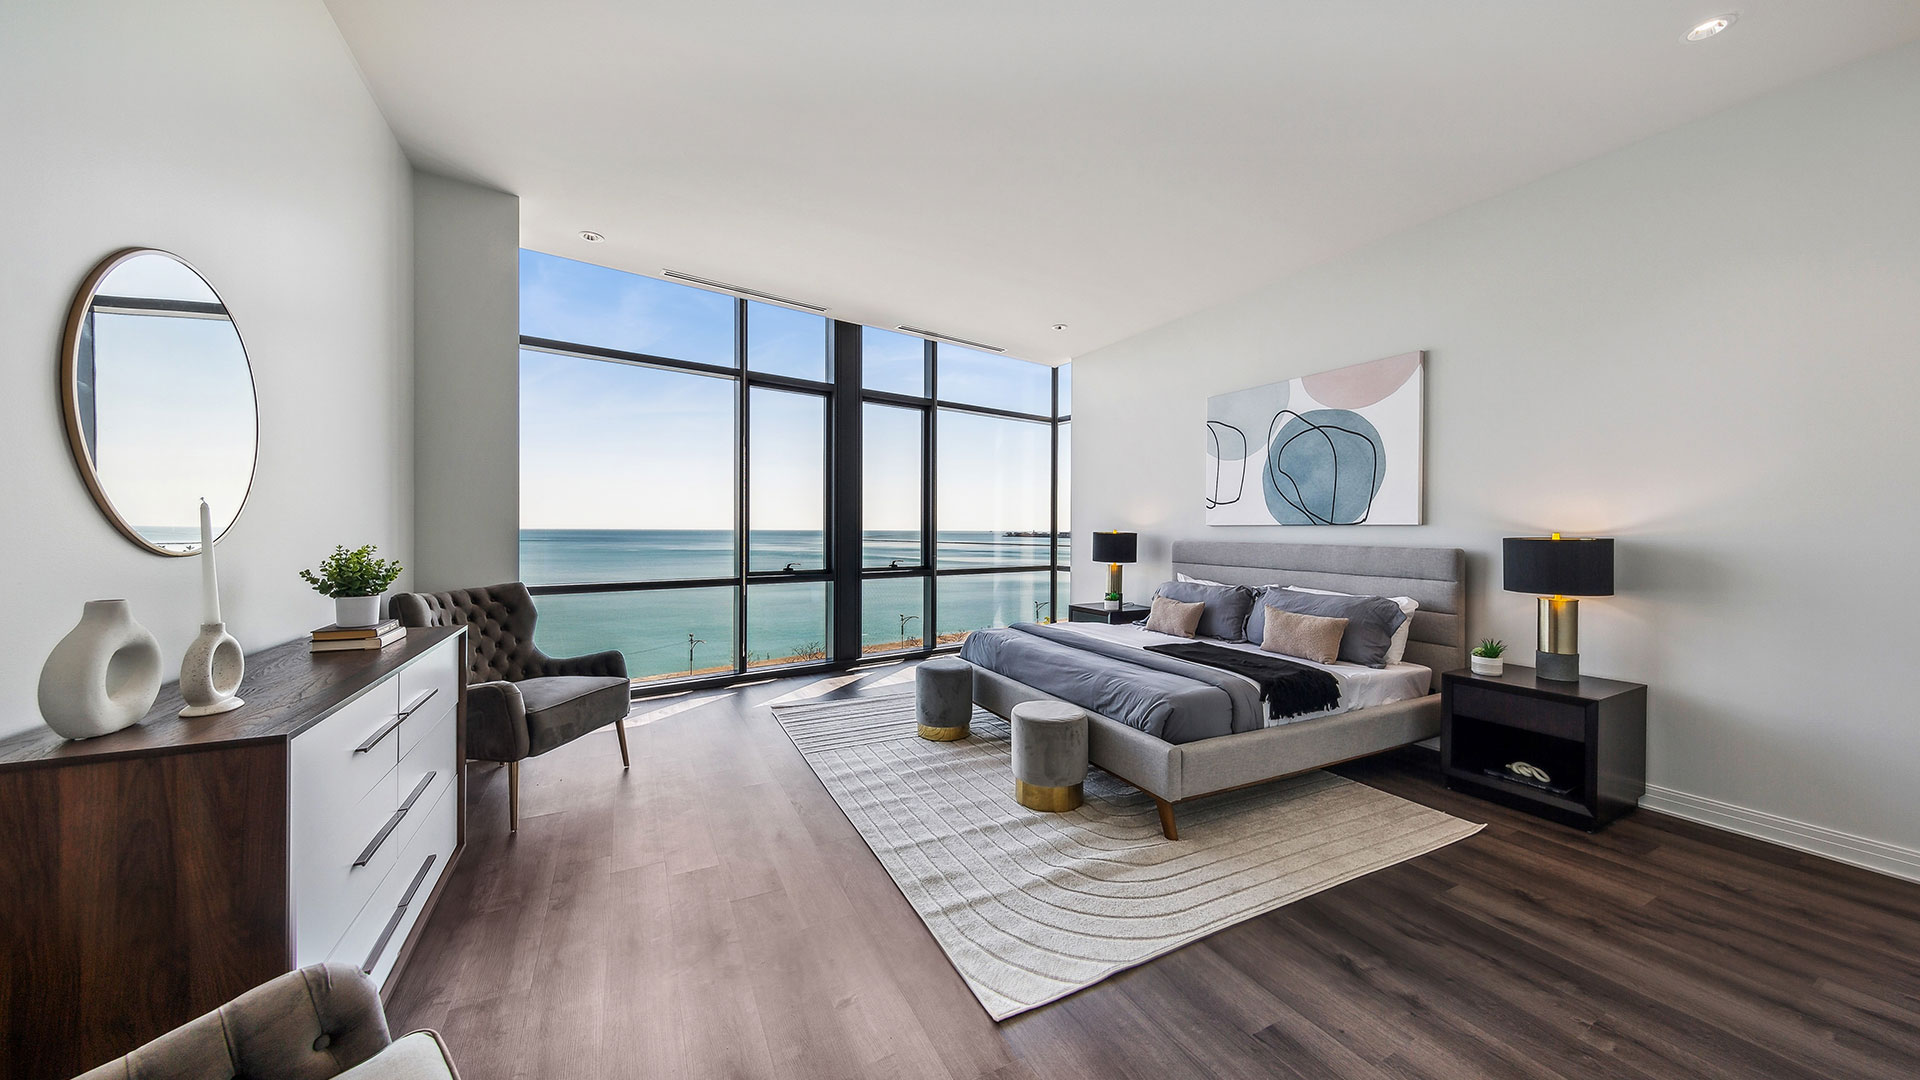 Modern bedroom with large floor-to-ceiling windows offering ocean views. Features a gray bed, black nightstands, white dresser, round mirror, and contemporary art on the wall.